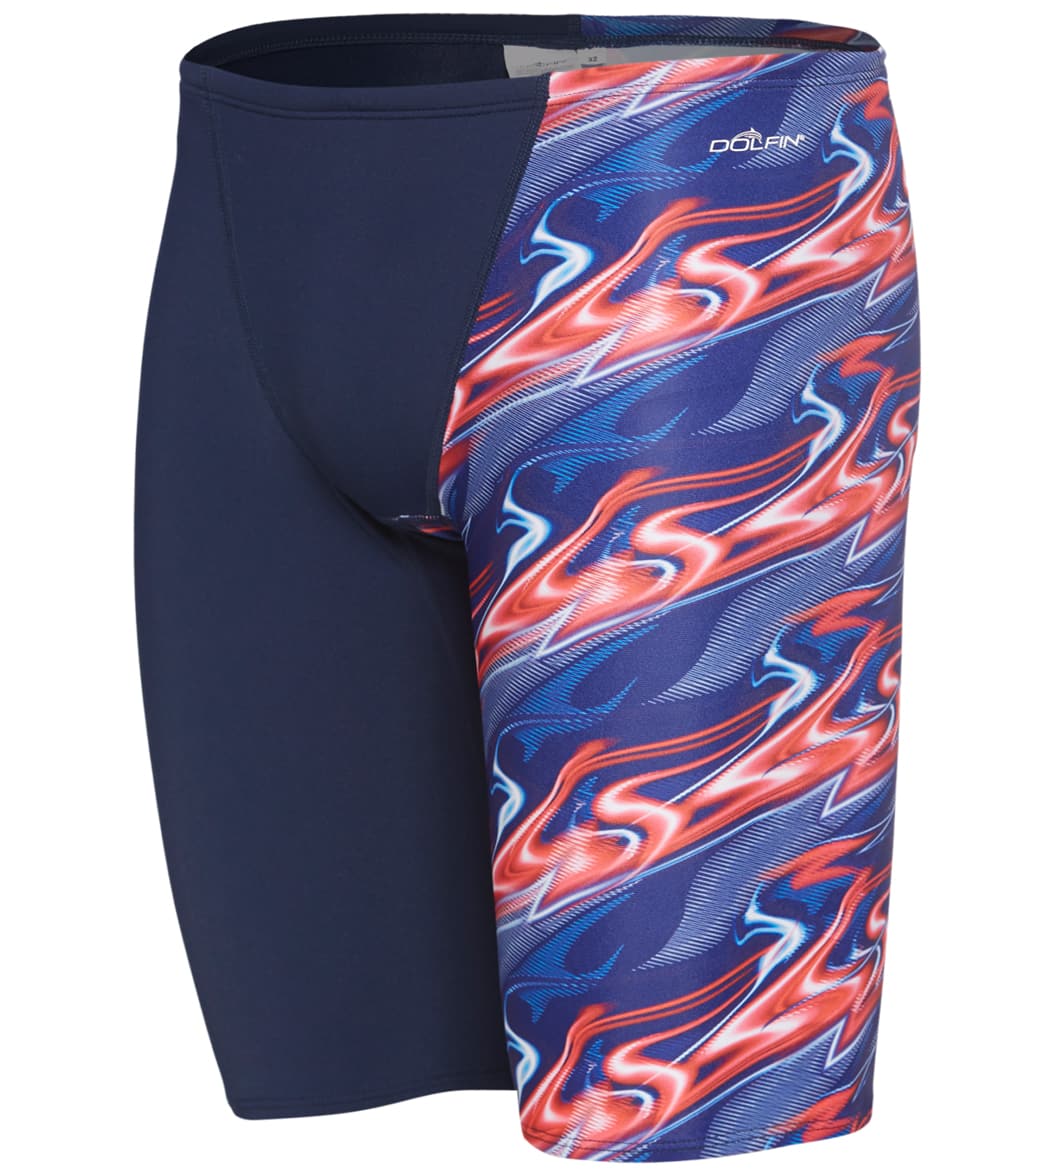 Dolfin Reliance Men's Inferno Team Print Spliced Jammer Swimsuit - Red/White/Blue 24 Polyester - Swimoutlet.com